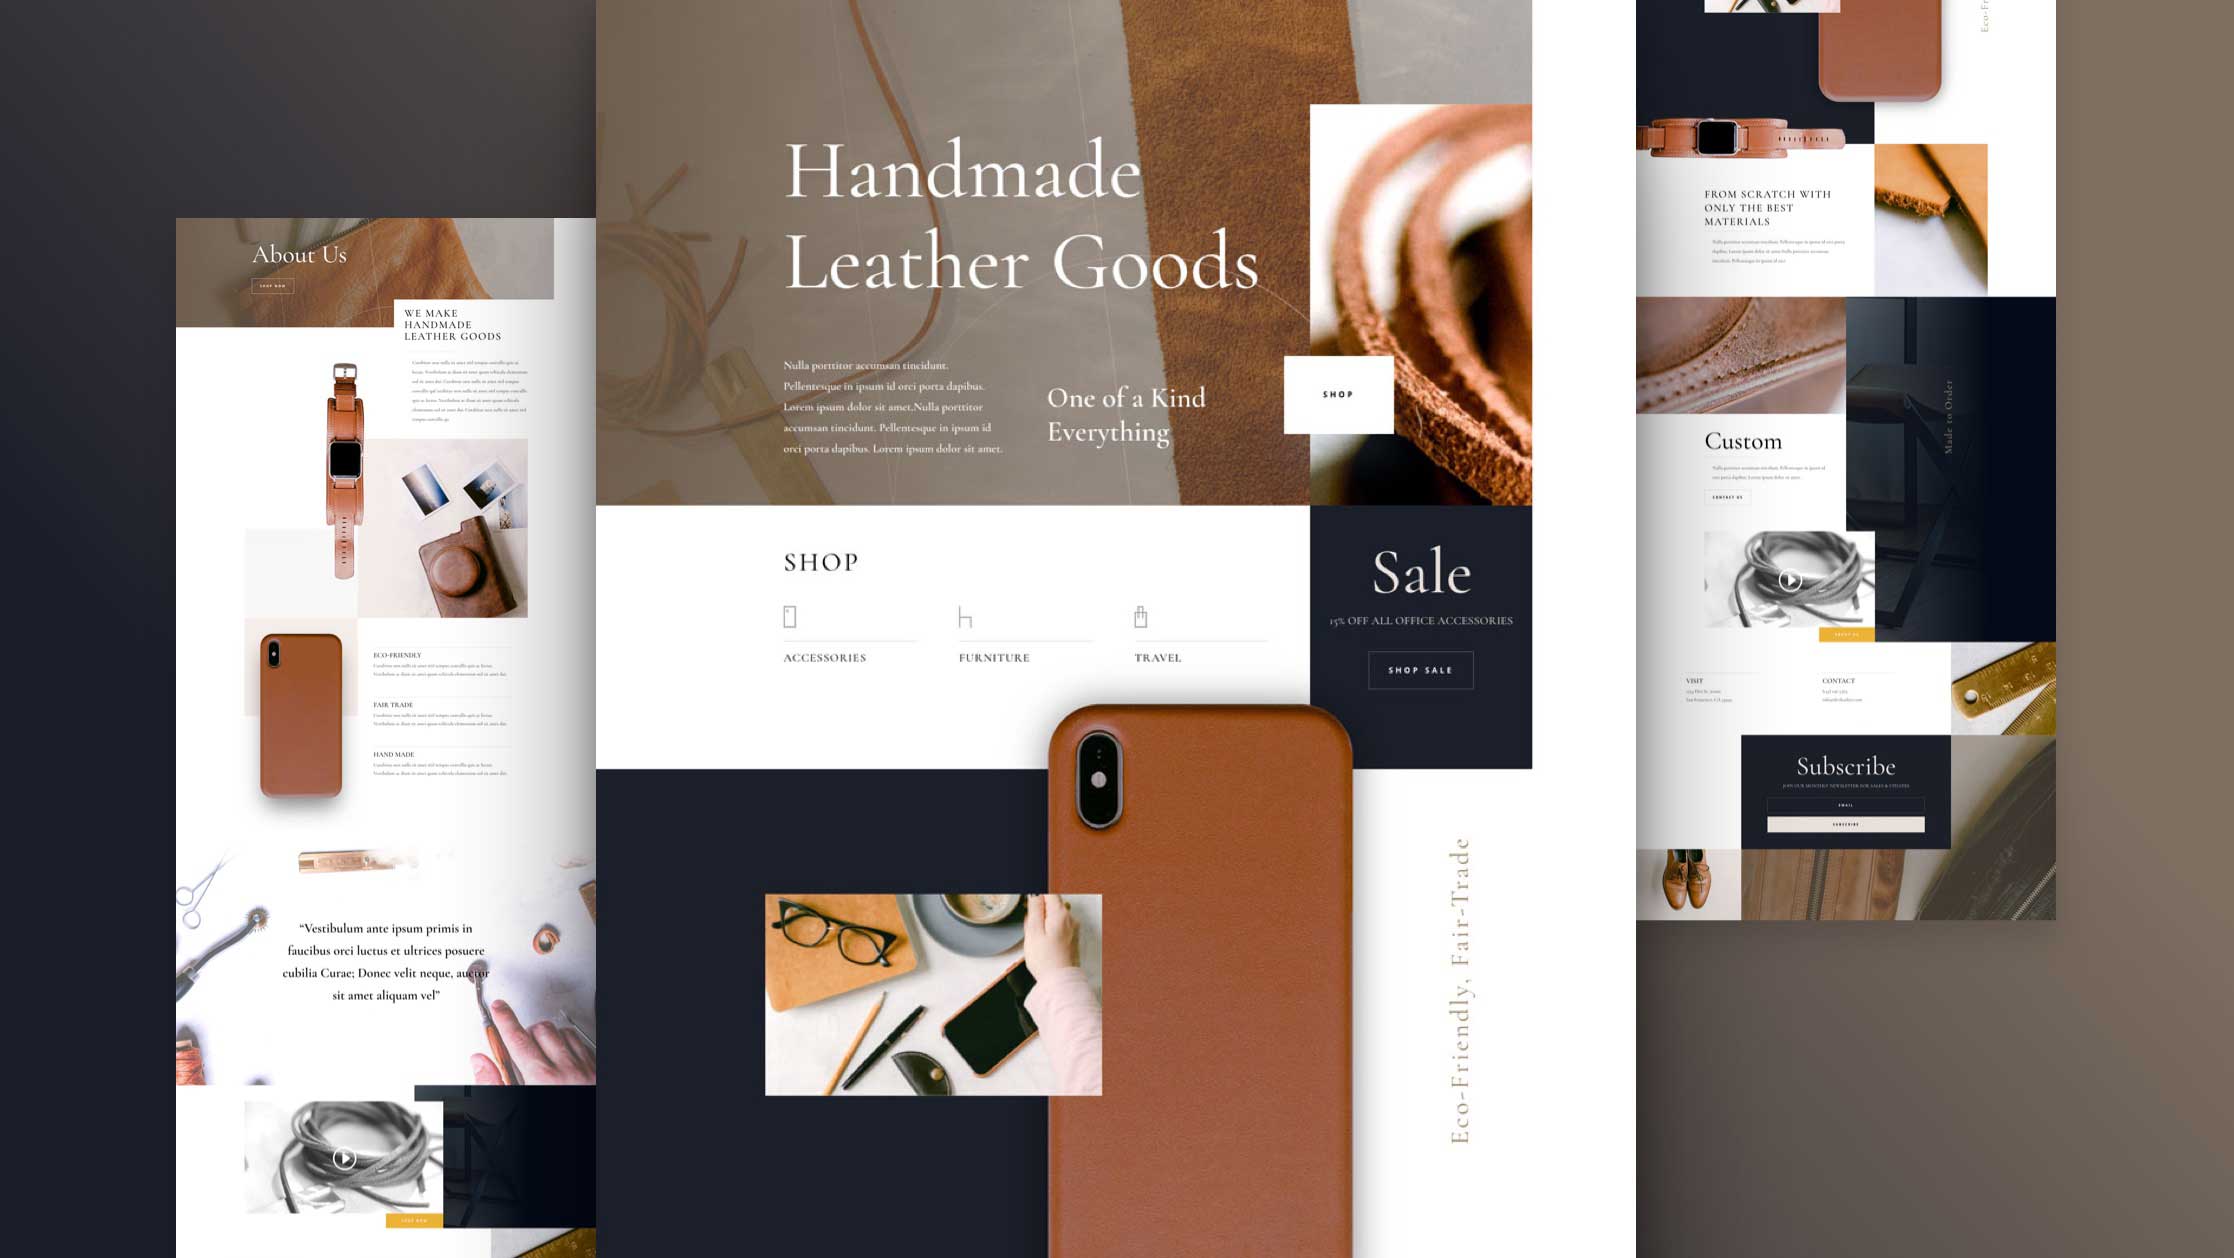 Get a FREE Leather Company Layout Pack for Divi